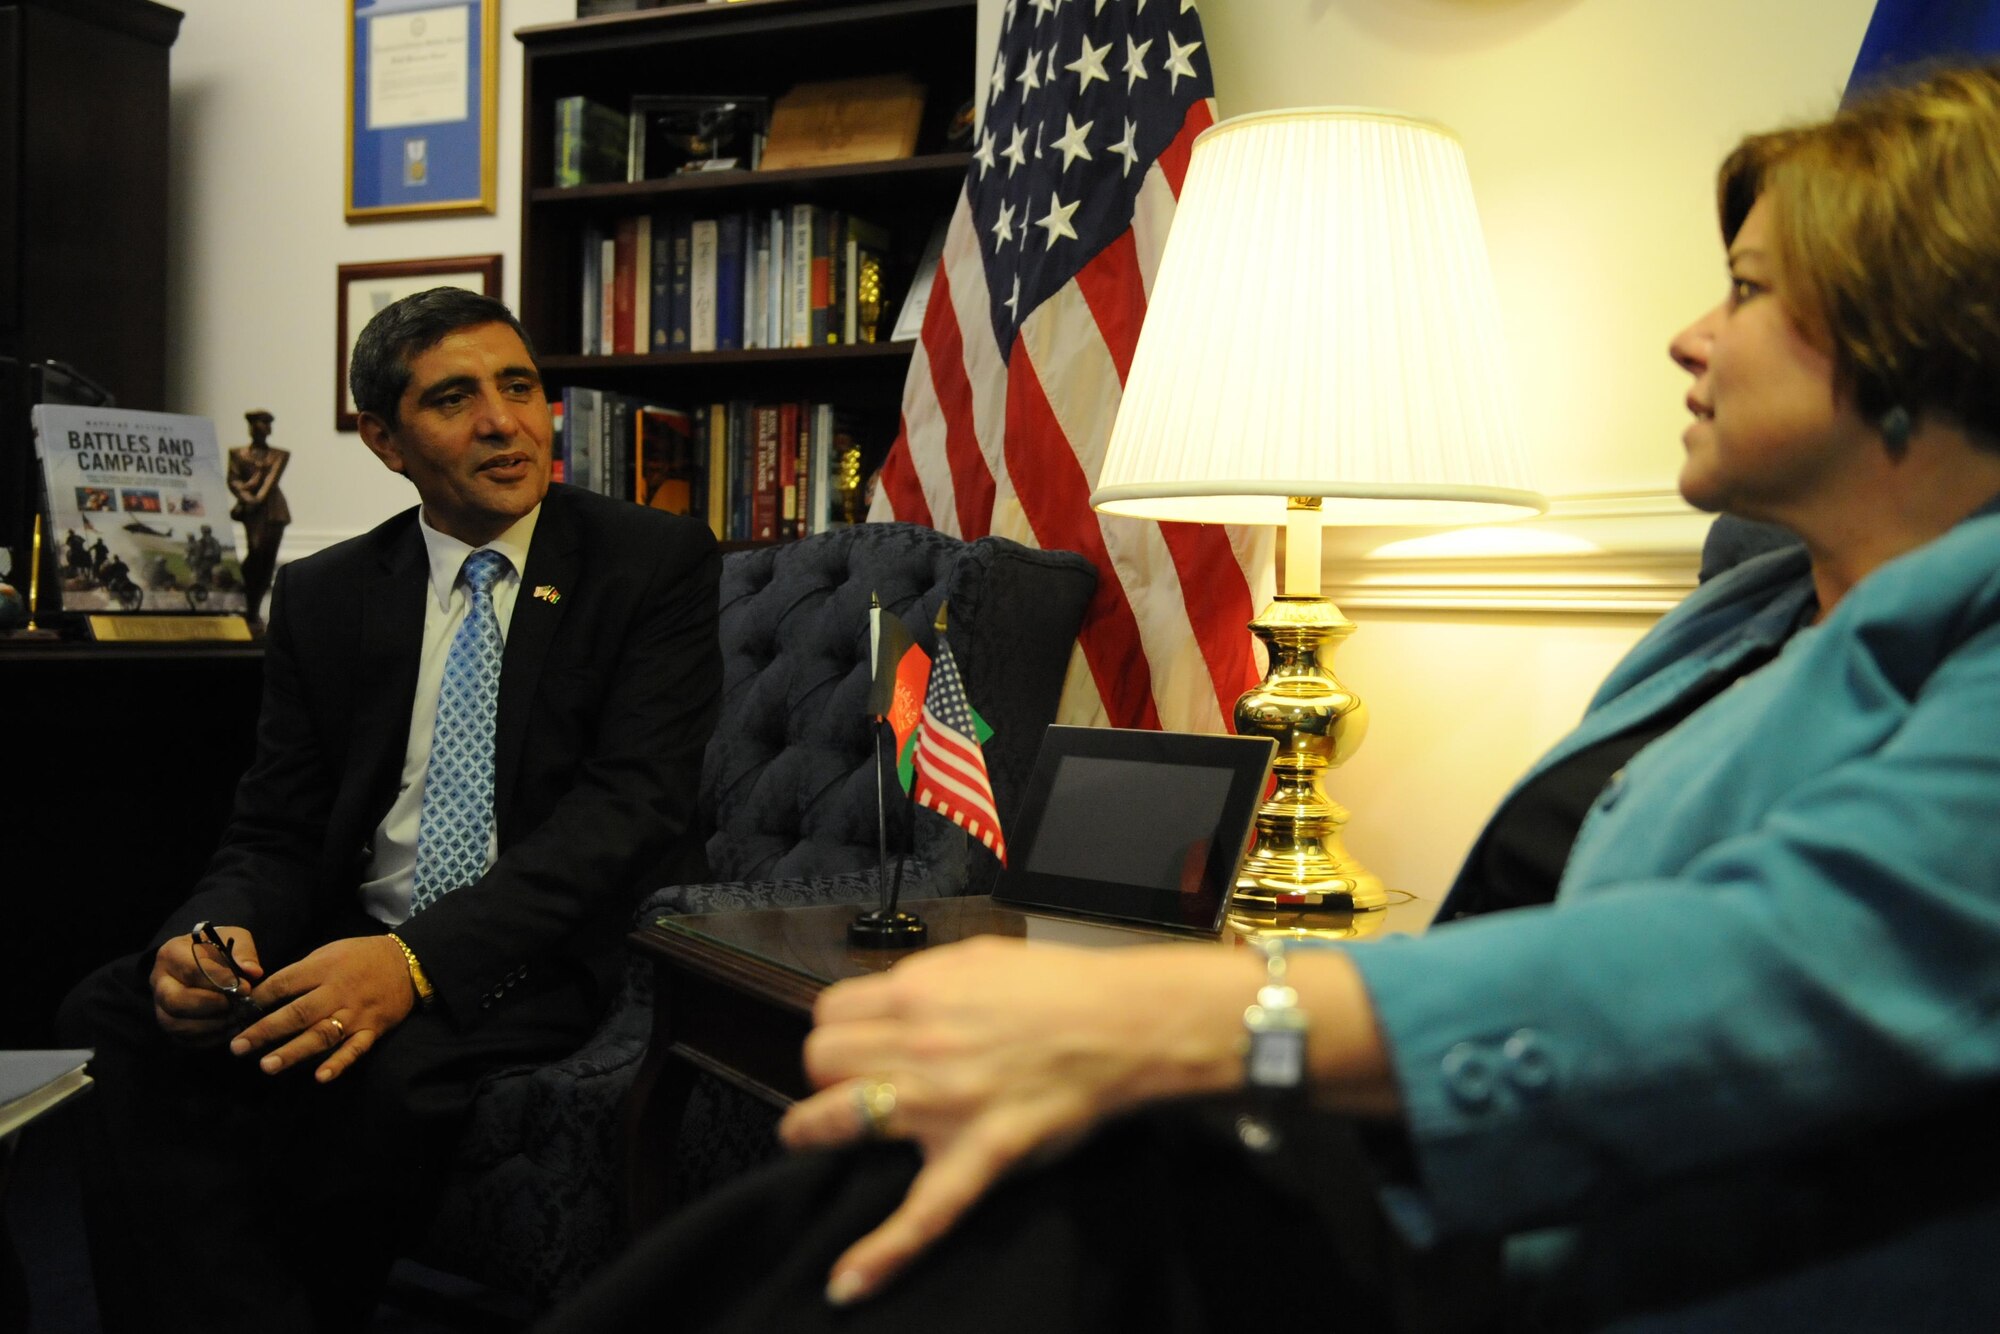 Heidi H. Grant, right, the Air Force’s deputy undersecretary for international affairs, talks with Afghan Maj. Gen. Ghulam Sakhi, of the Afghanistan Ministry of Defense for acquisition, technology and logistics, during a visit to the Pentagon, Oct. 27, 2015. The Afghanistan delegation met with Grant to discuss training and support for the Afghan Ministry of Defense. (U.S. Air Force photo/Senior Airman Hailey Haux)